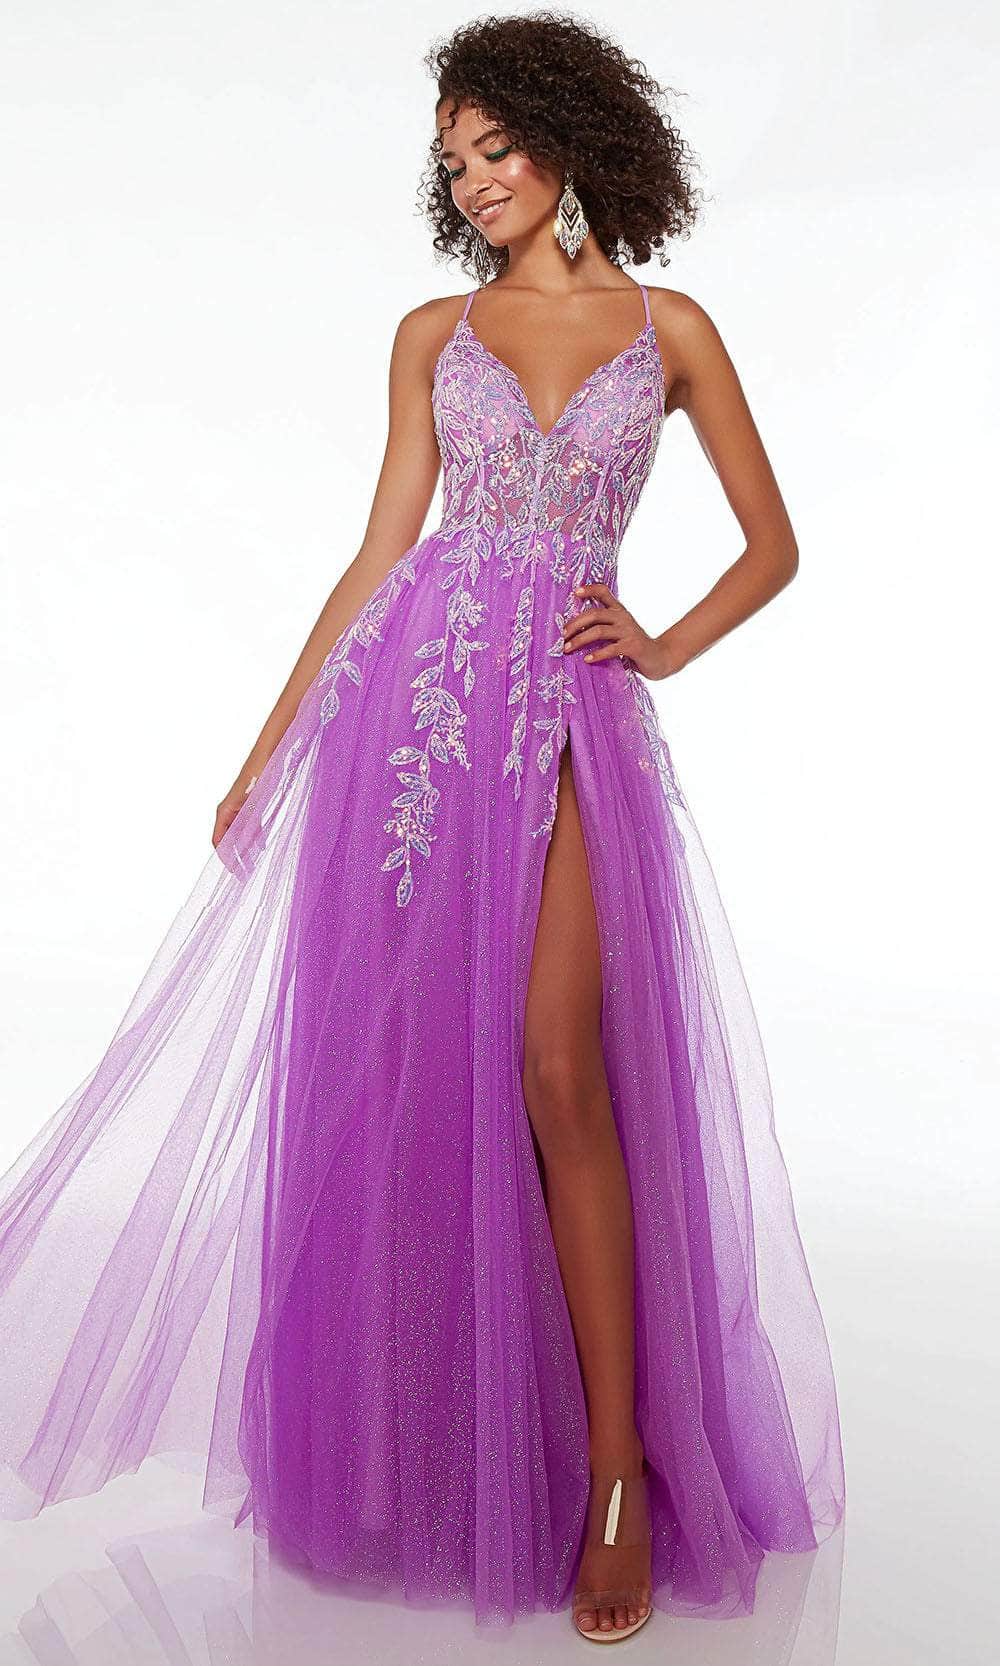 Image of Alyce Paris 61562 - Glittered Deep V-Neck Prom Gown